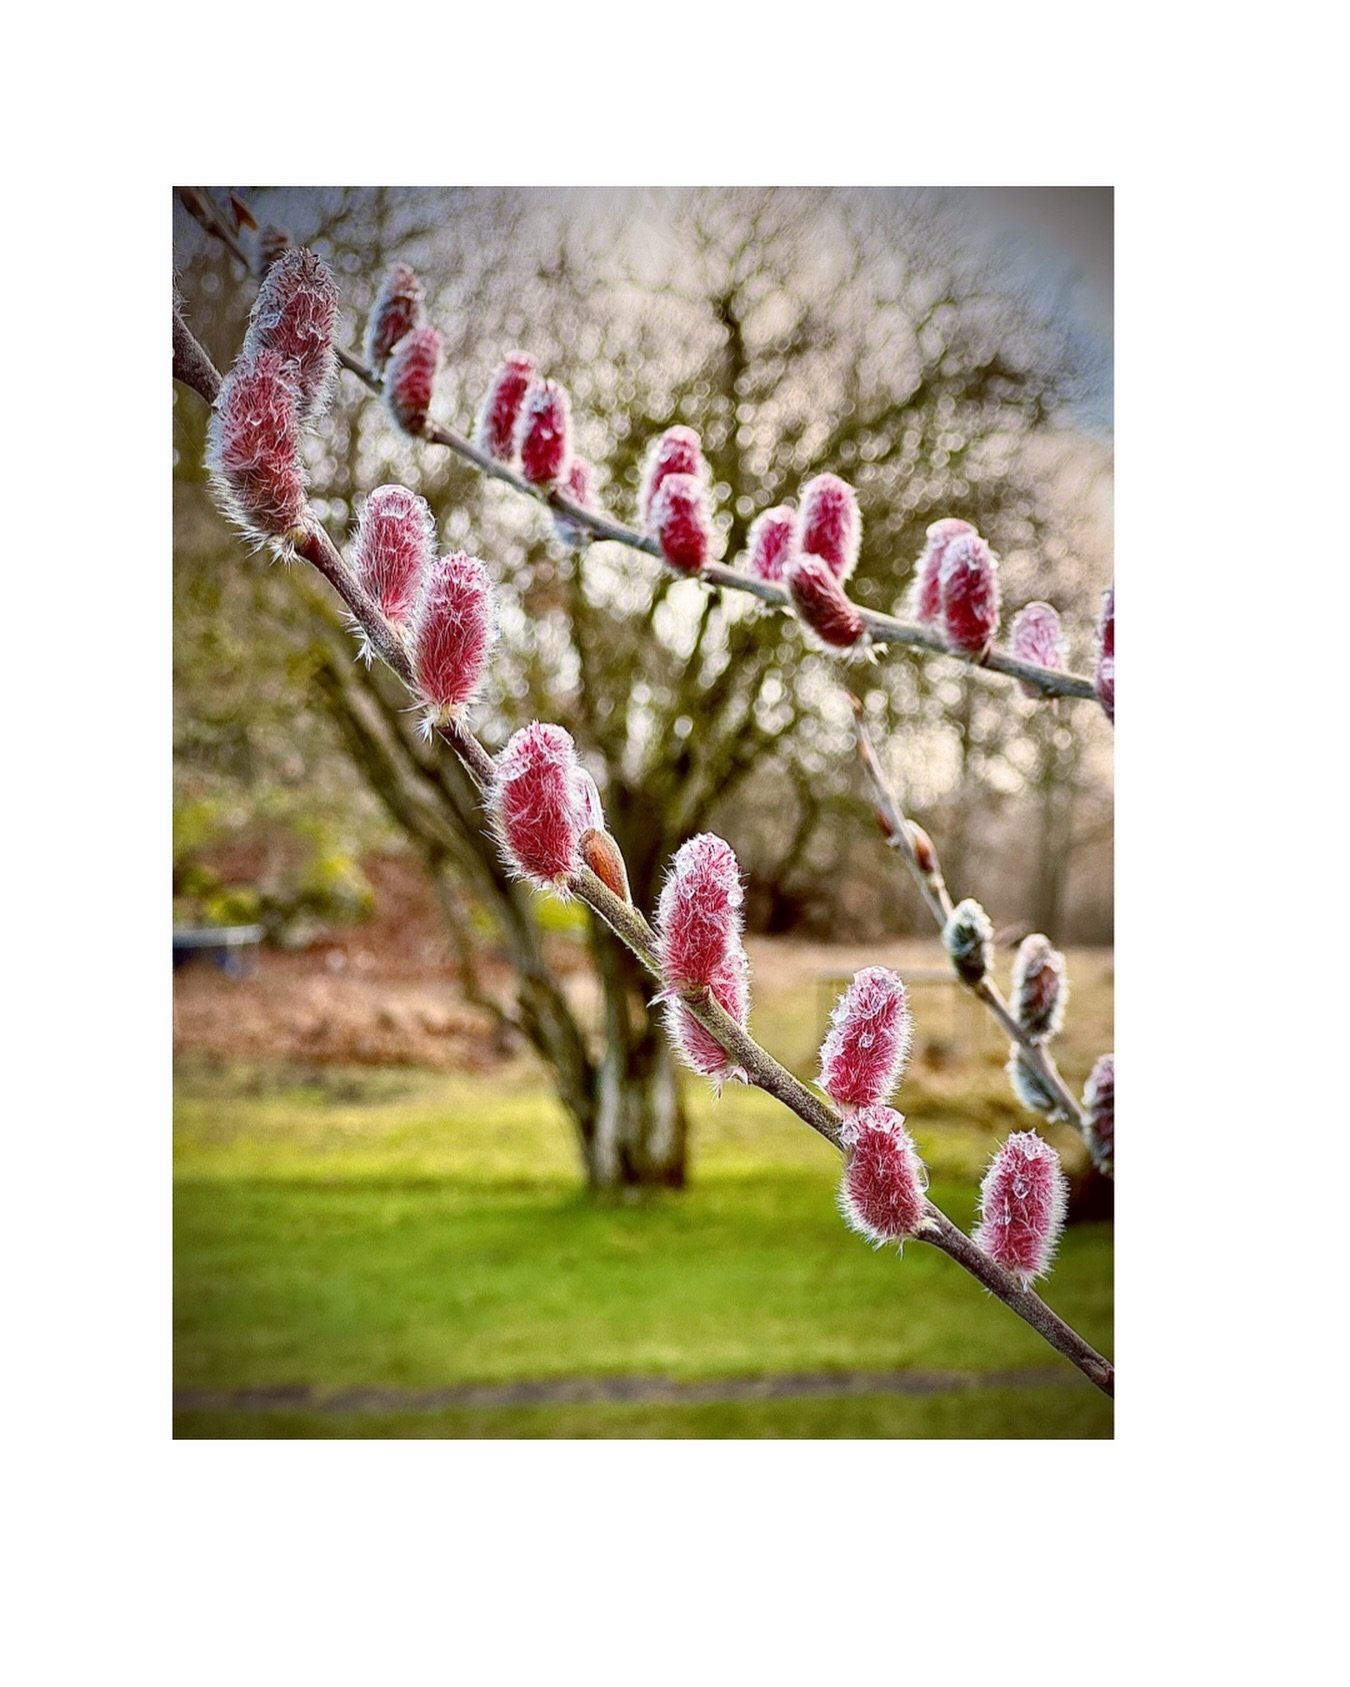 V&aring;r favorit.

#Salixchaenomeloides&rsquo;Mt.Aso&rsquo; #v&aring;rtr&auml;dg&aring;rd #permakultur